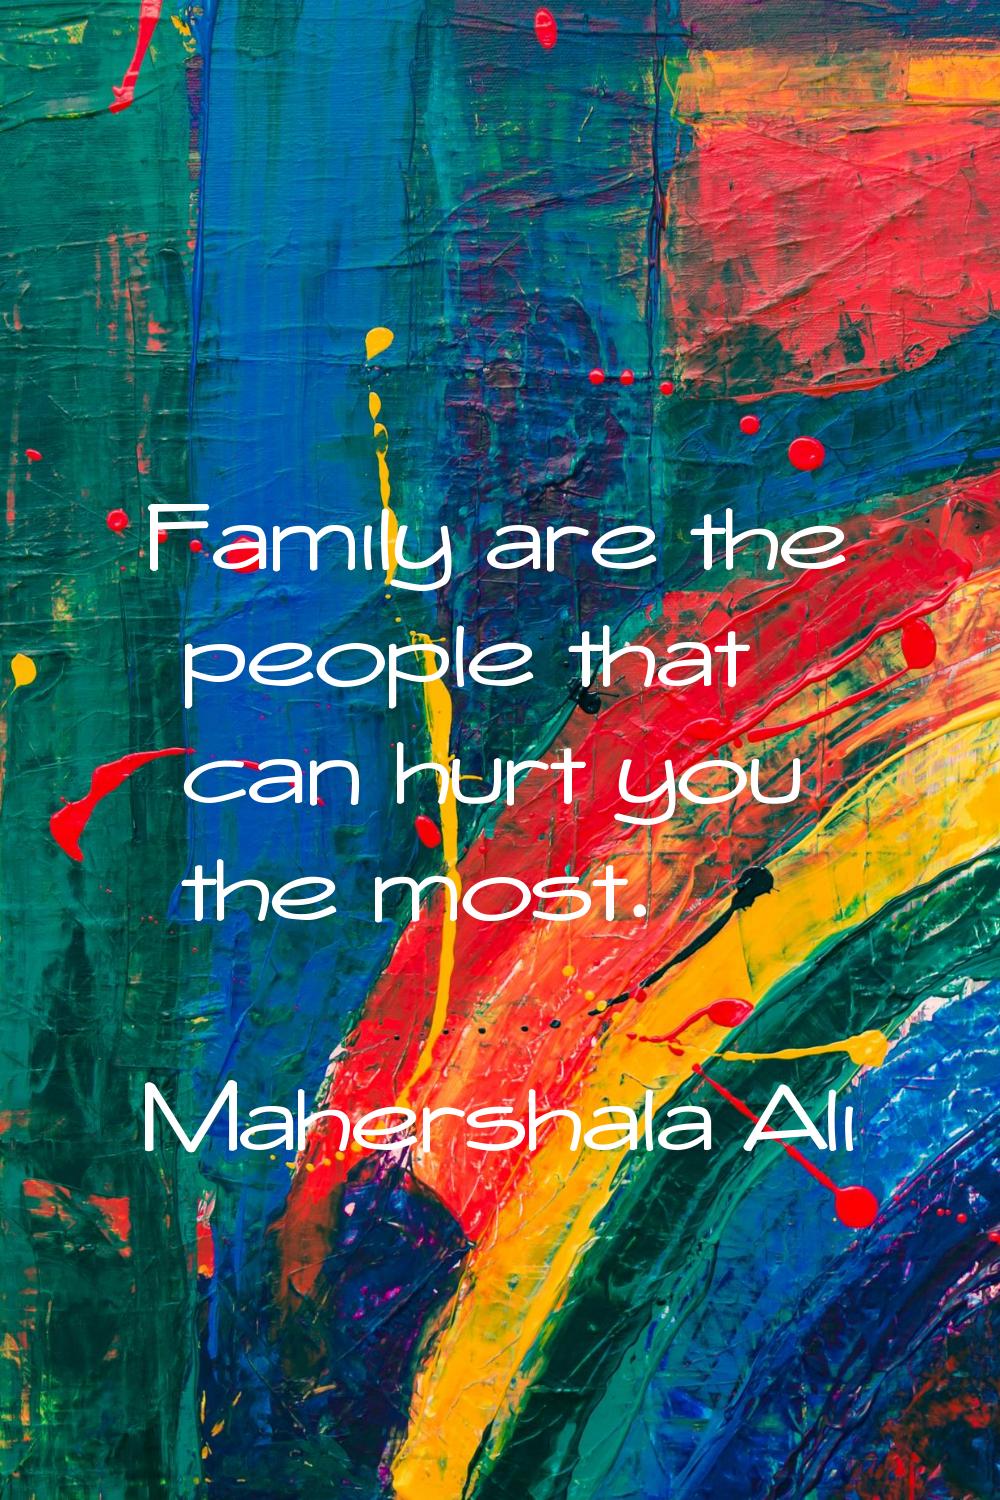 Family are the people that can hurt you the most.